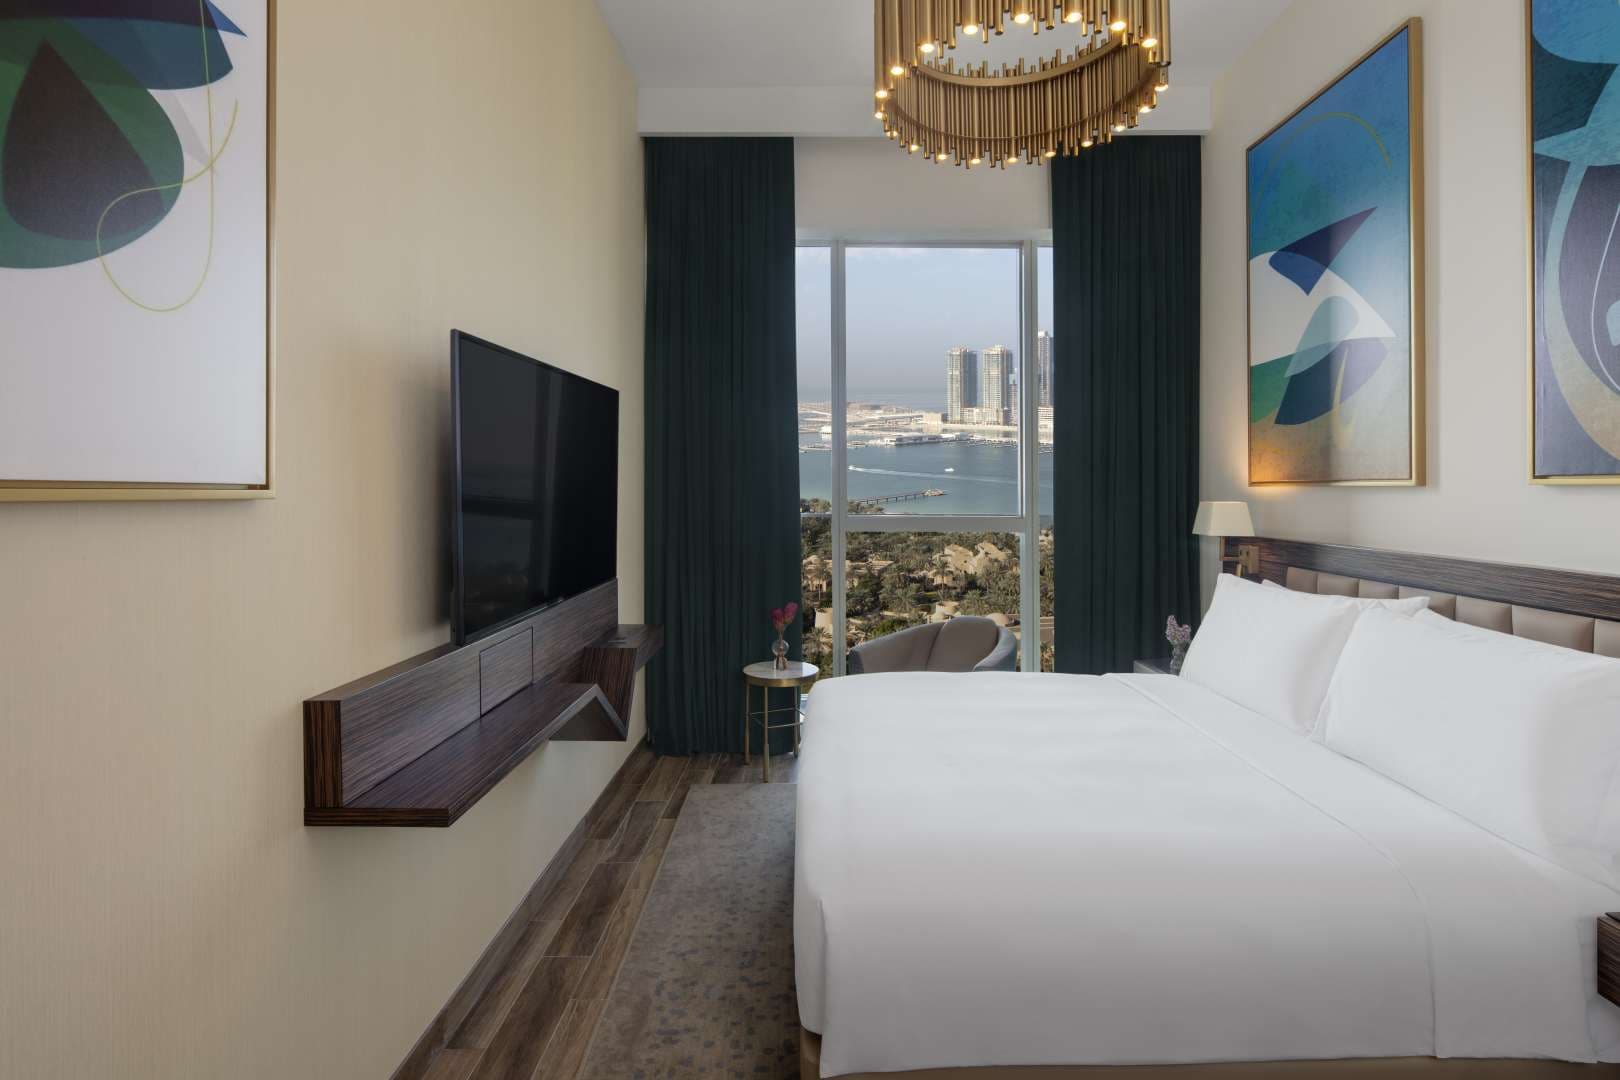 2 Bedroom Serviced Residences For Short Term Avani Palm View Hotel Suites Lp10659 1444eb5a5e7a6900.jpg